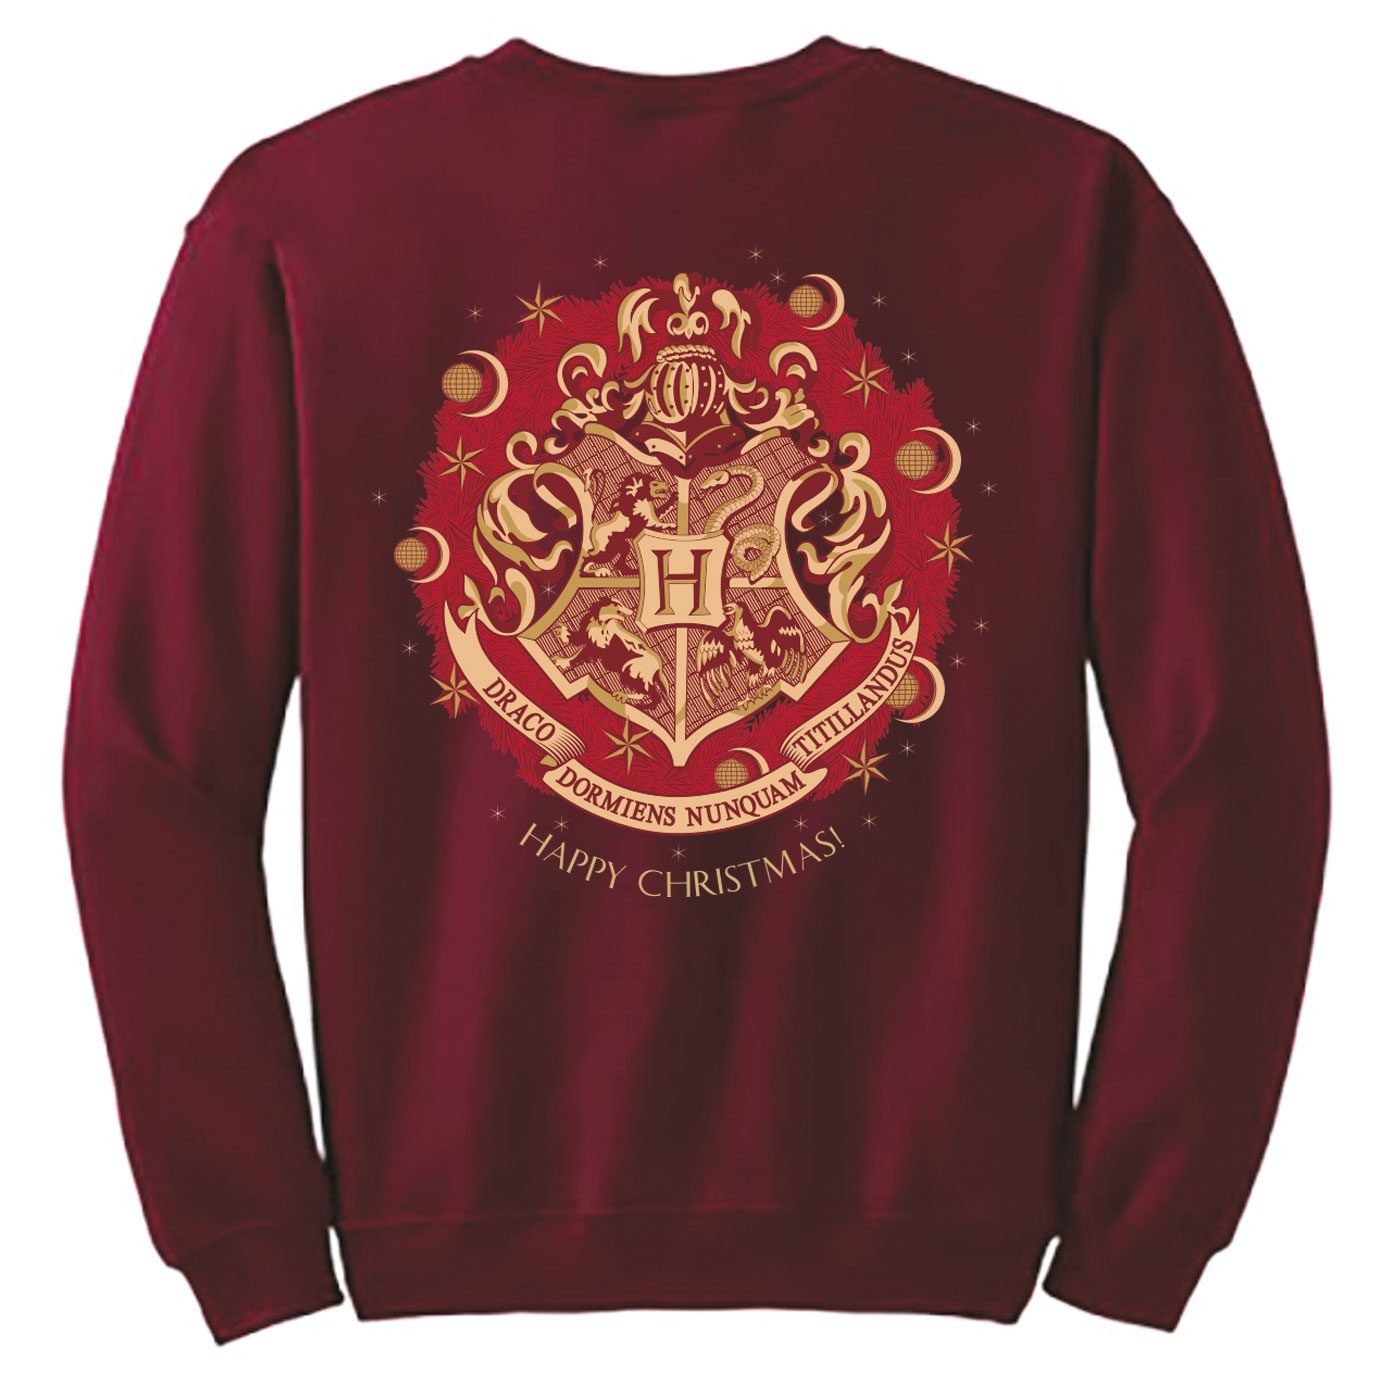 Harry Potter Sweater Happy Christmas (L)